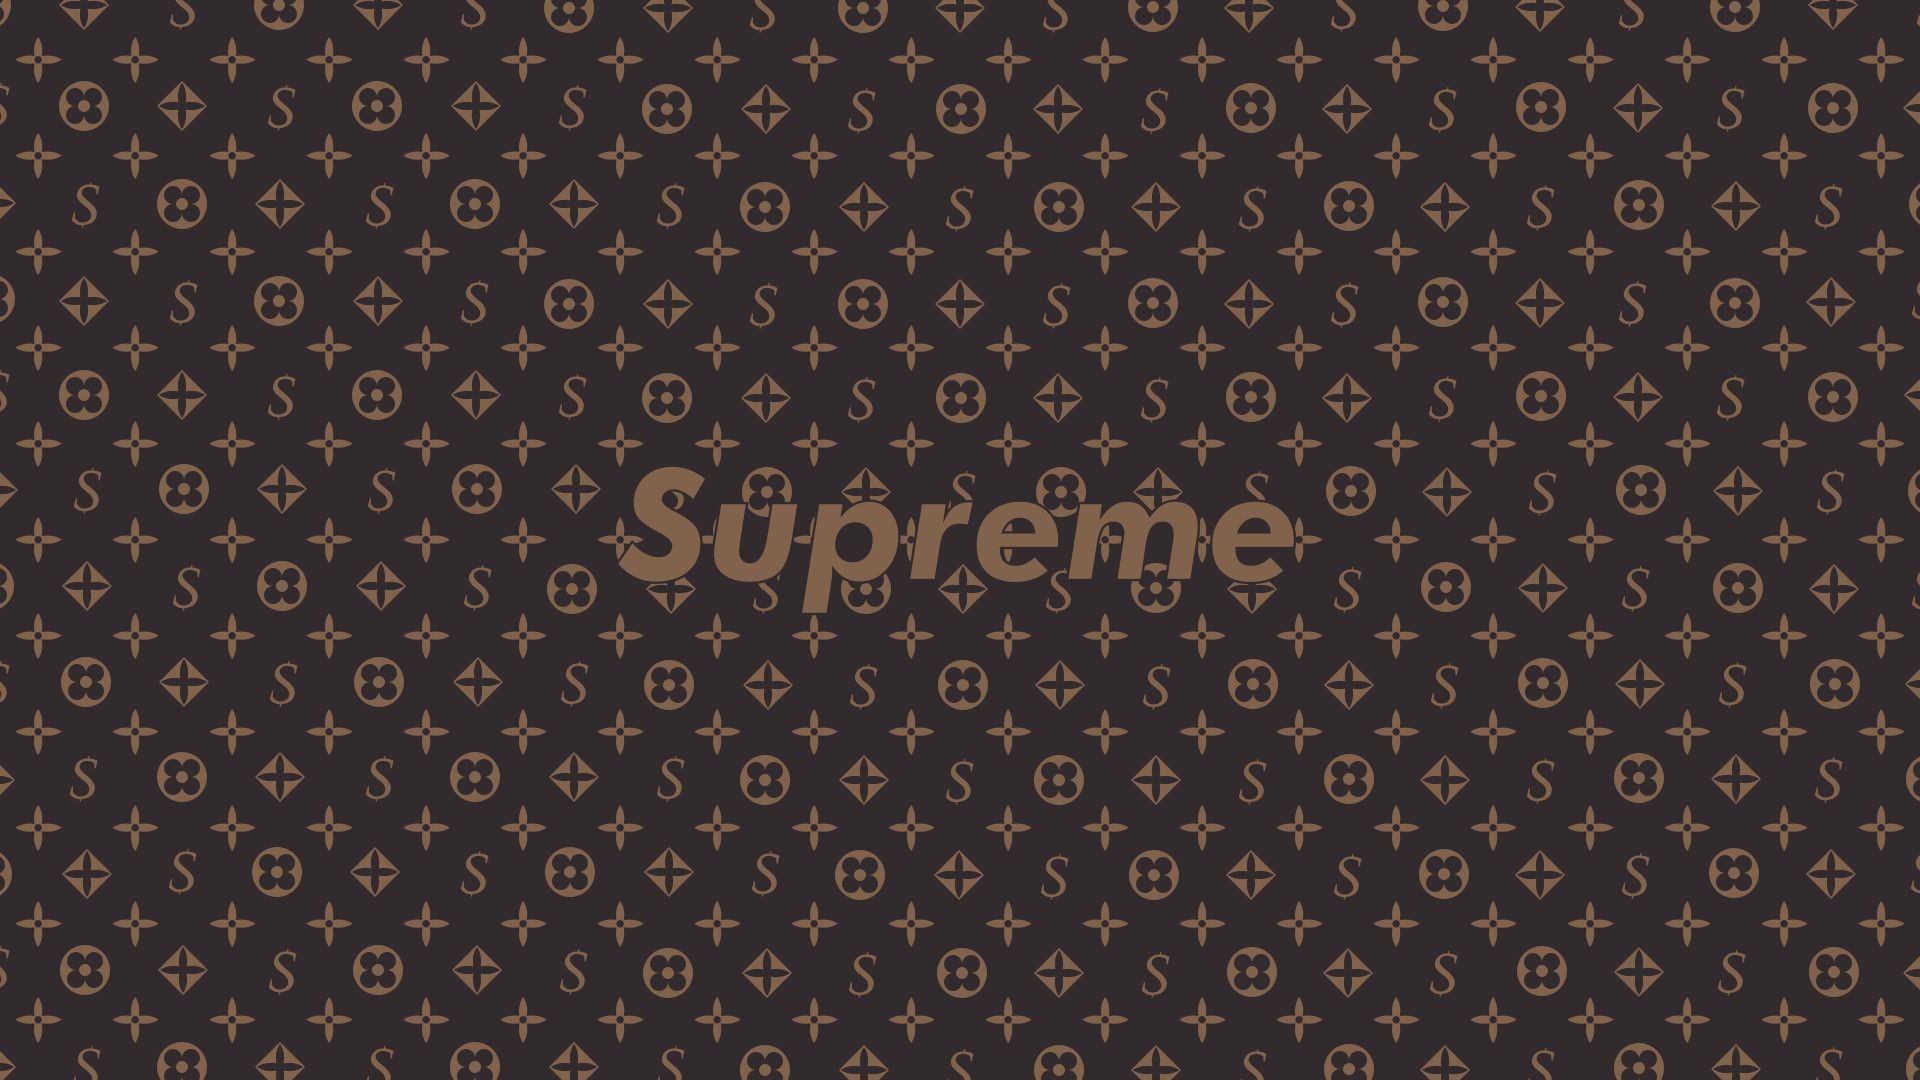 Free download 1920x1080 Some Supreme x LV Wallpapers I made